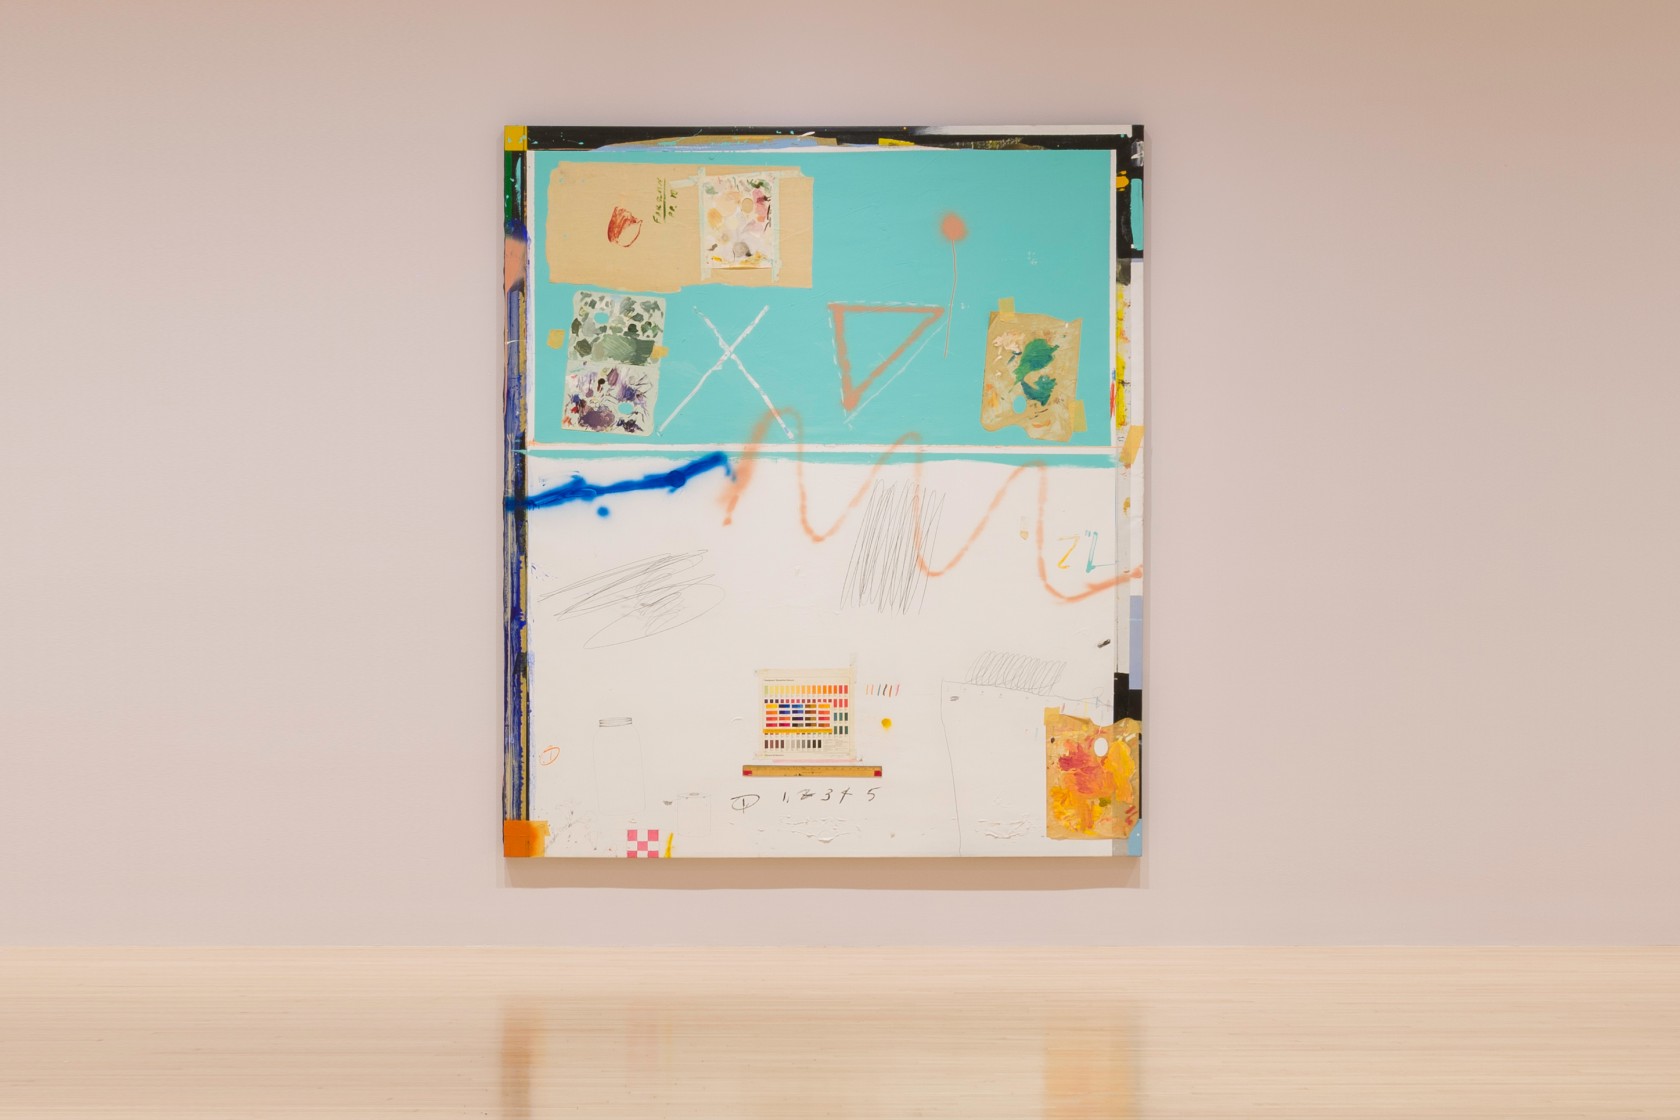 Raymond Saunders, Palette, 1983, oil, enamel, graphite, and oil pastel on canvas, 94 1/2 x 82 1/2 x 1 1/2 in. (240.03 x 209.55 x 3.81 cm). The Museum of Contemporary Art, Los Angeles. Gift of Joseph R. Austin.